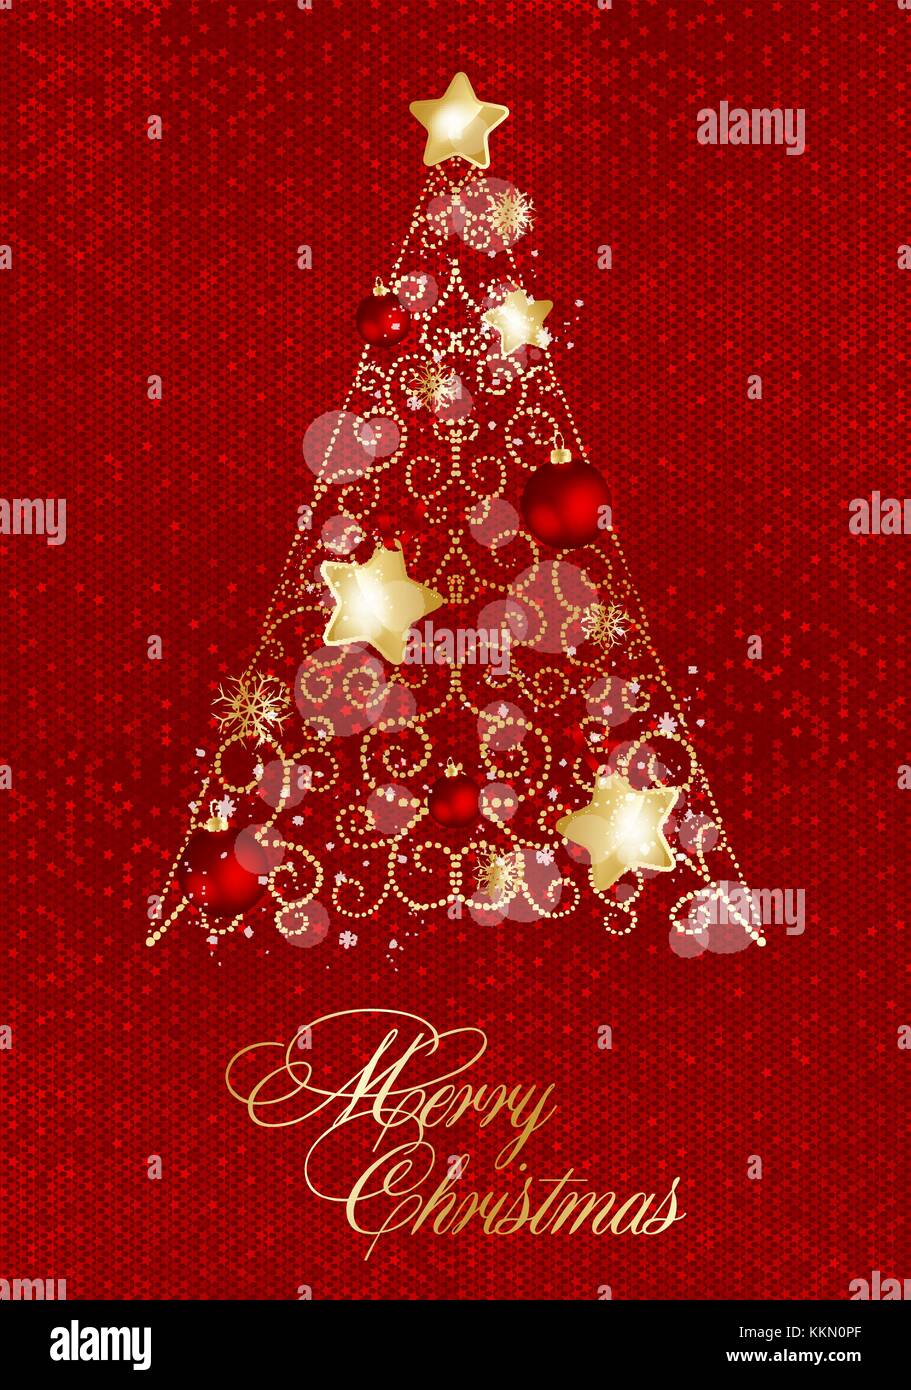 Decorated christmas tree with star, lights, decoration balls. Merry Christmas and a happy new year. Stock Vector